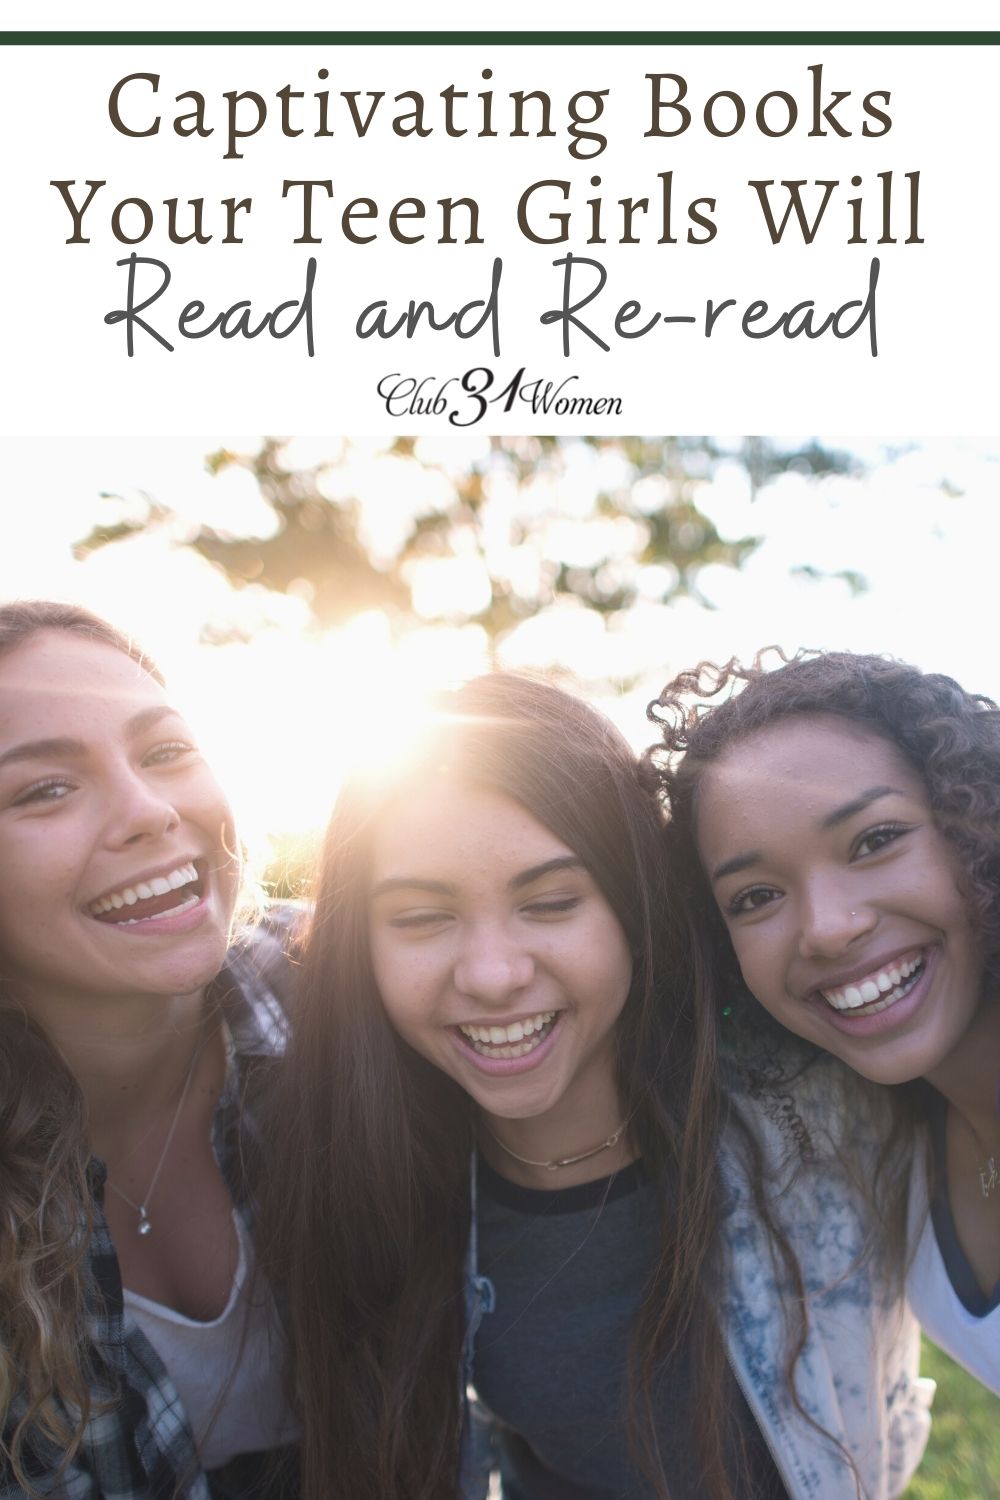 Re-reading stories really can be like visiting an old friend. These titles are sure to keep your teen girls coming back again and again. via @Club31Women